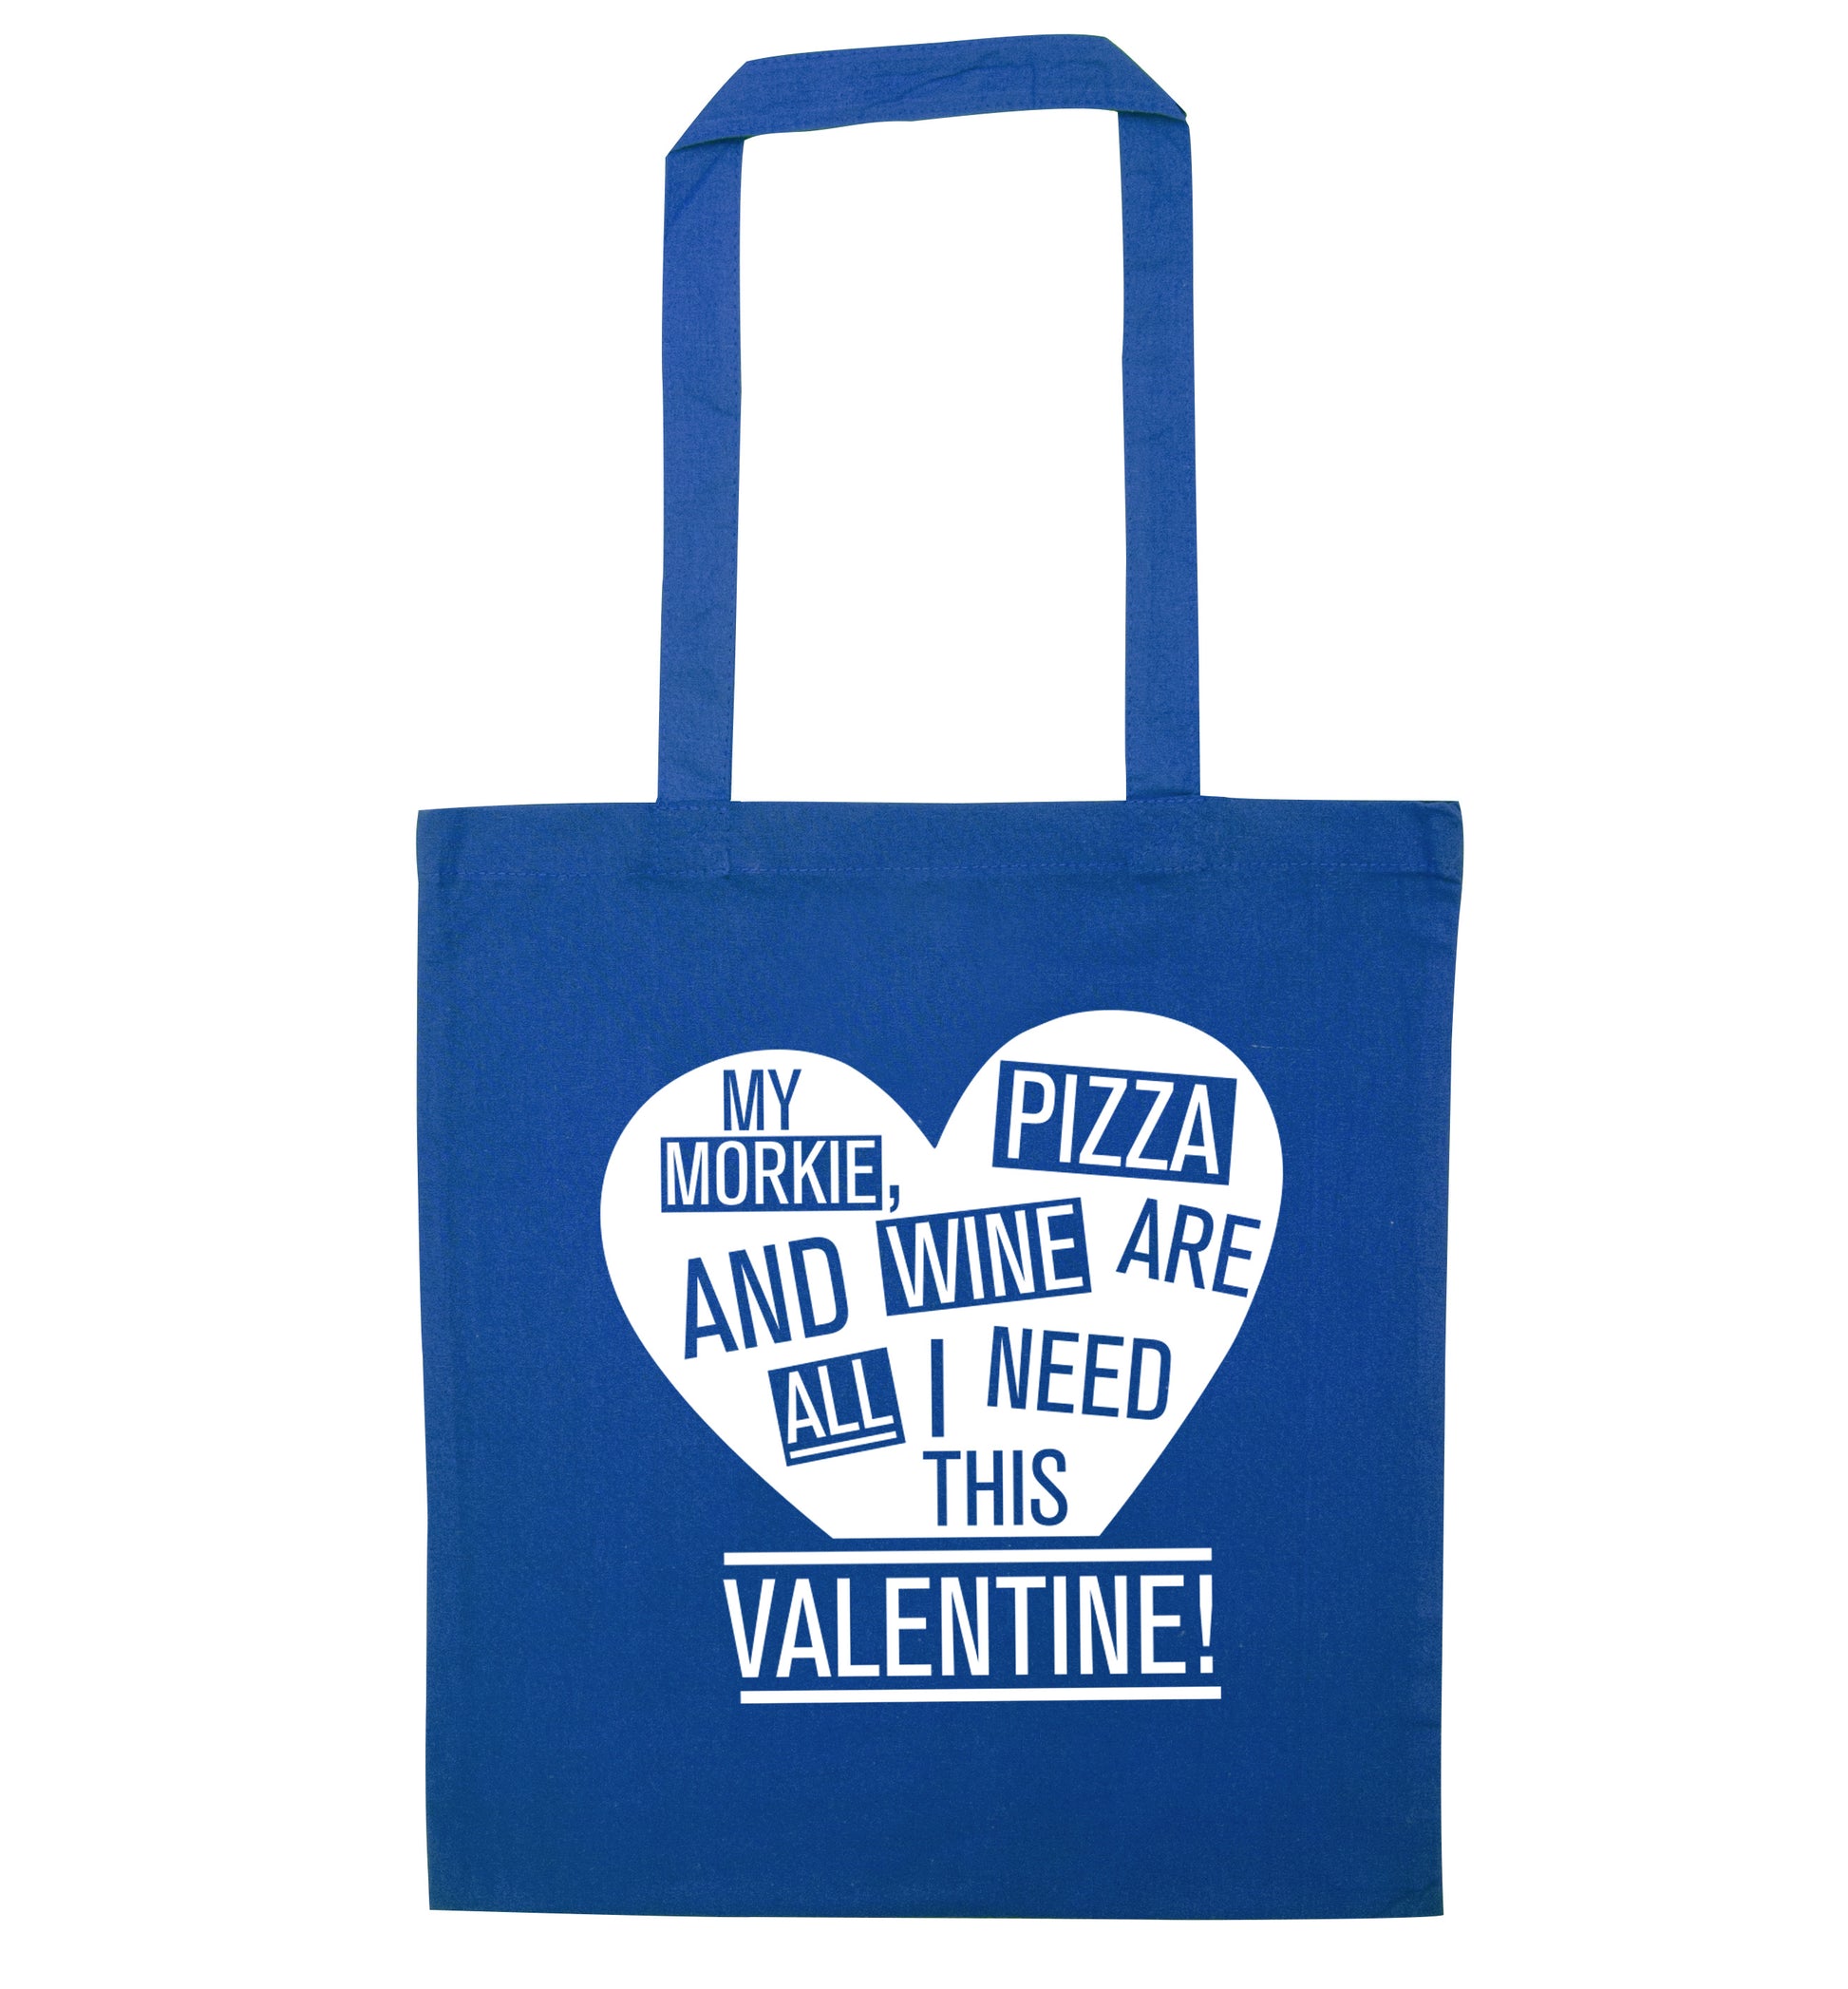 My morkie, pizza and wine are all I need this valentine! blue tote bag